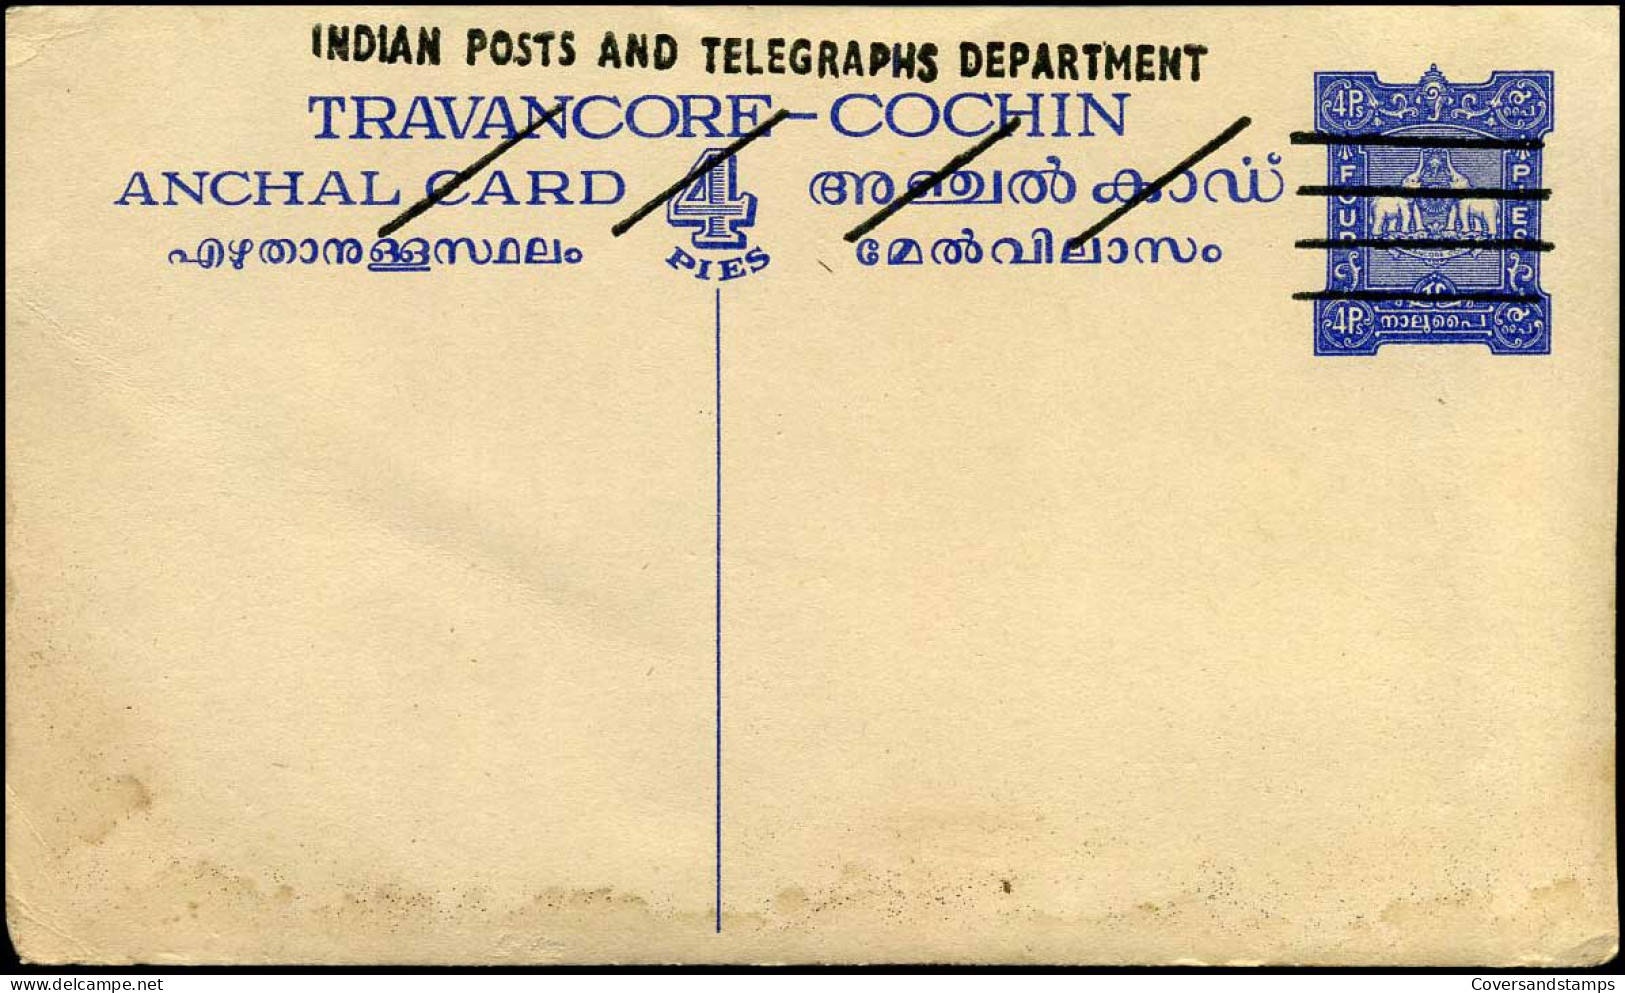 Post Card - Indian Posts And Telegraphs Department - Postcards